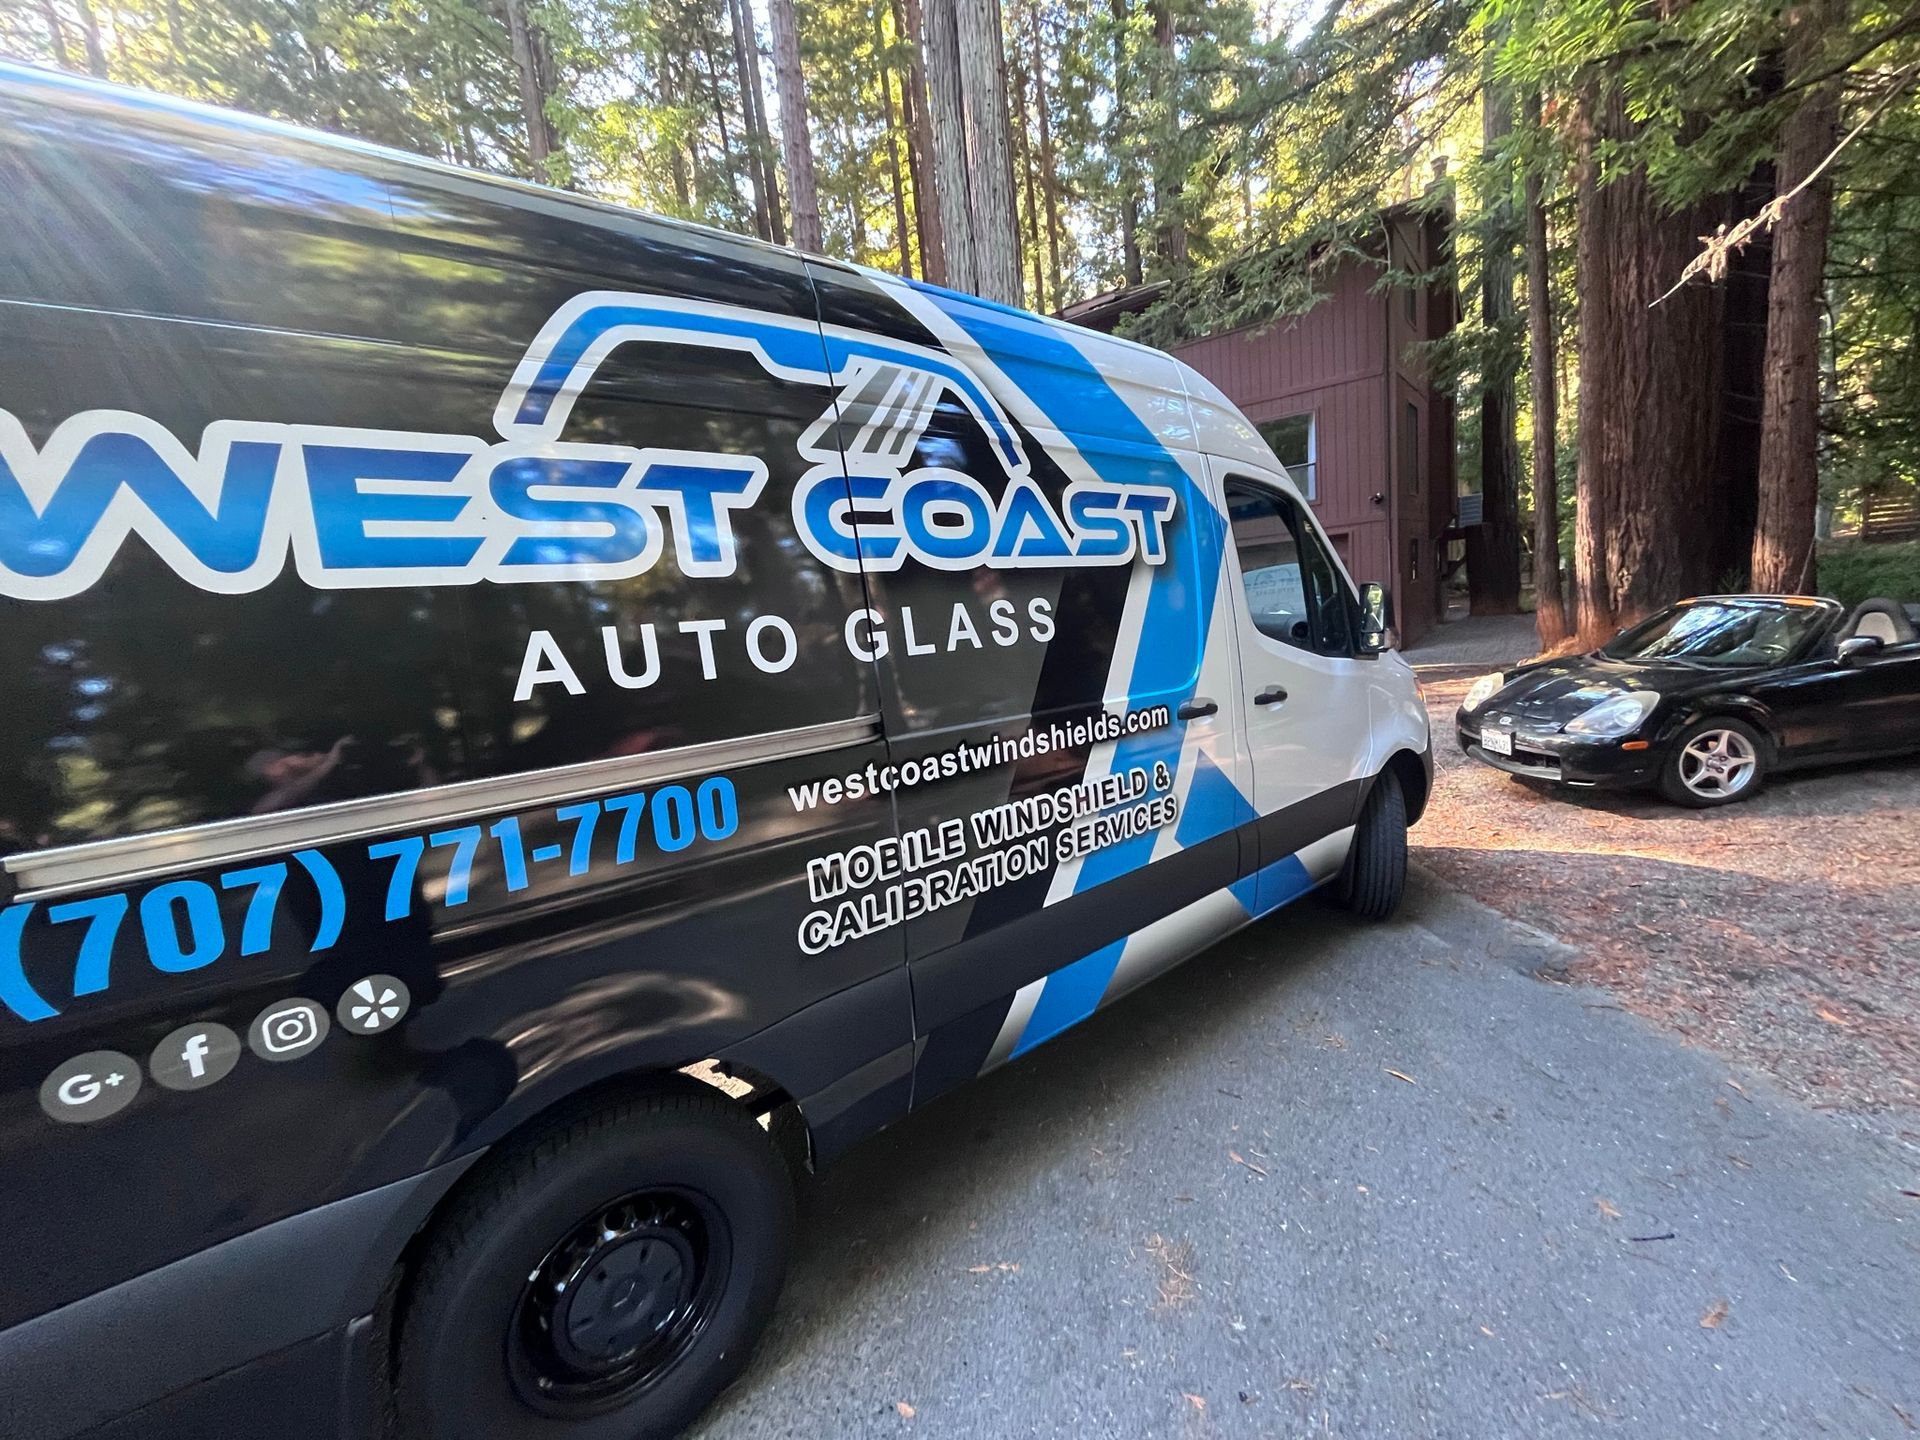 Mobile Windshield Replacement in Santa Rosa, CA